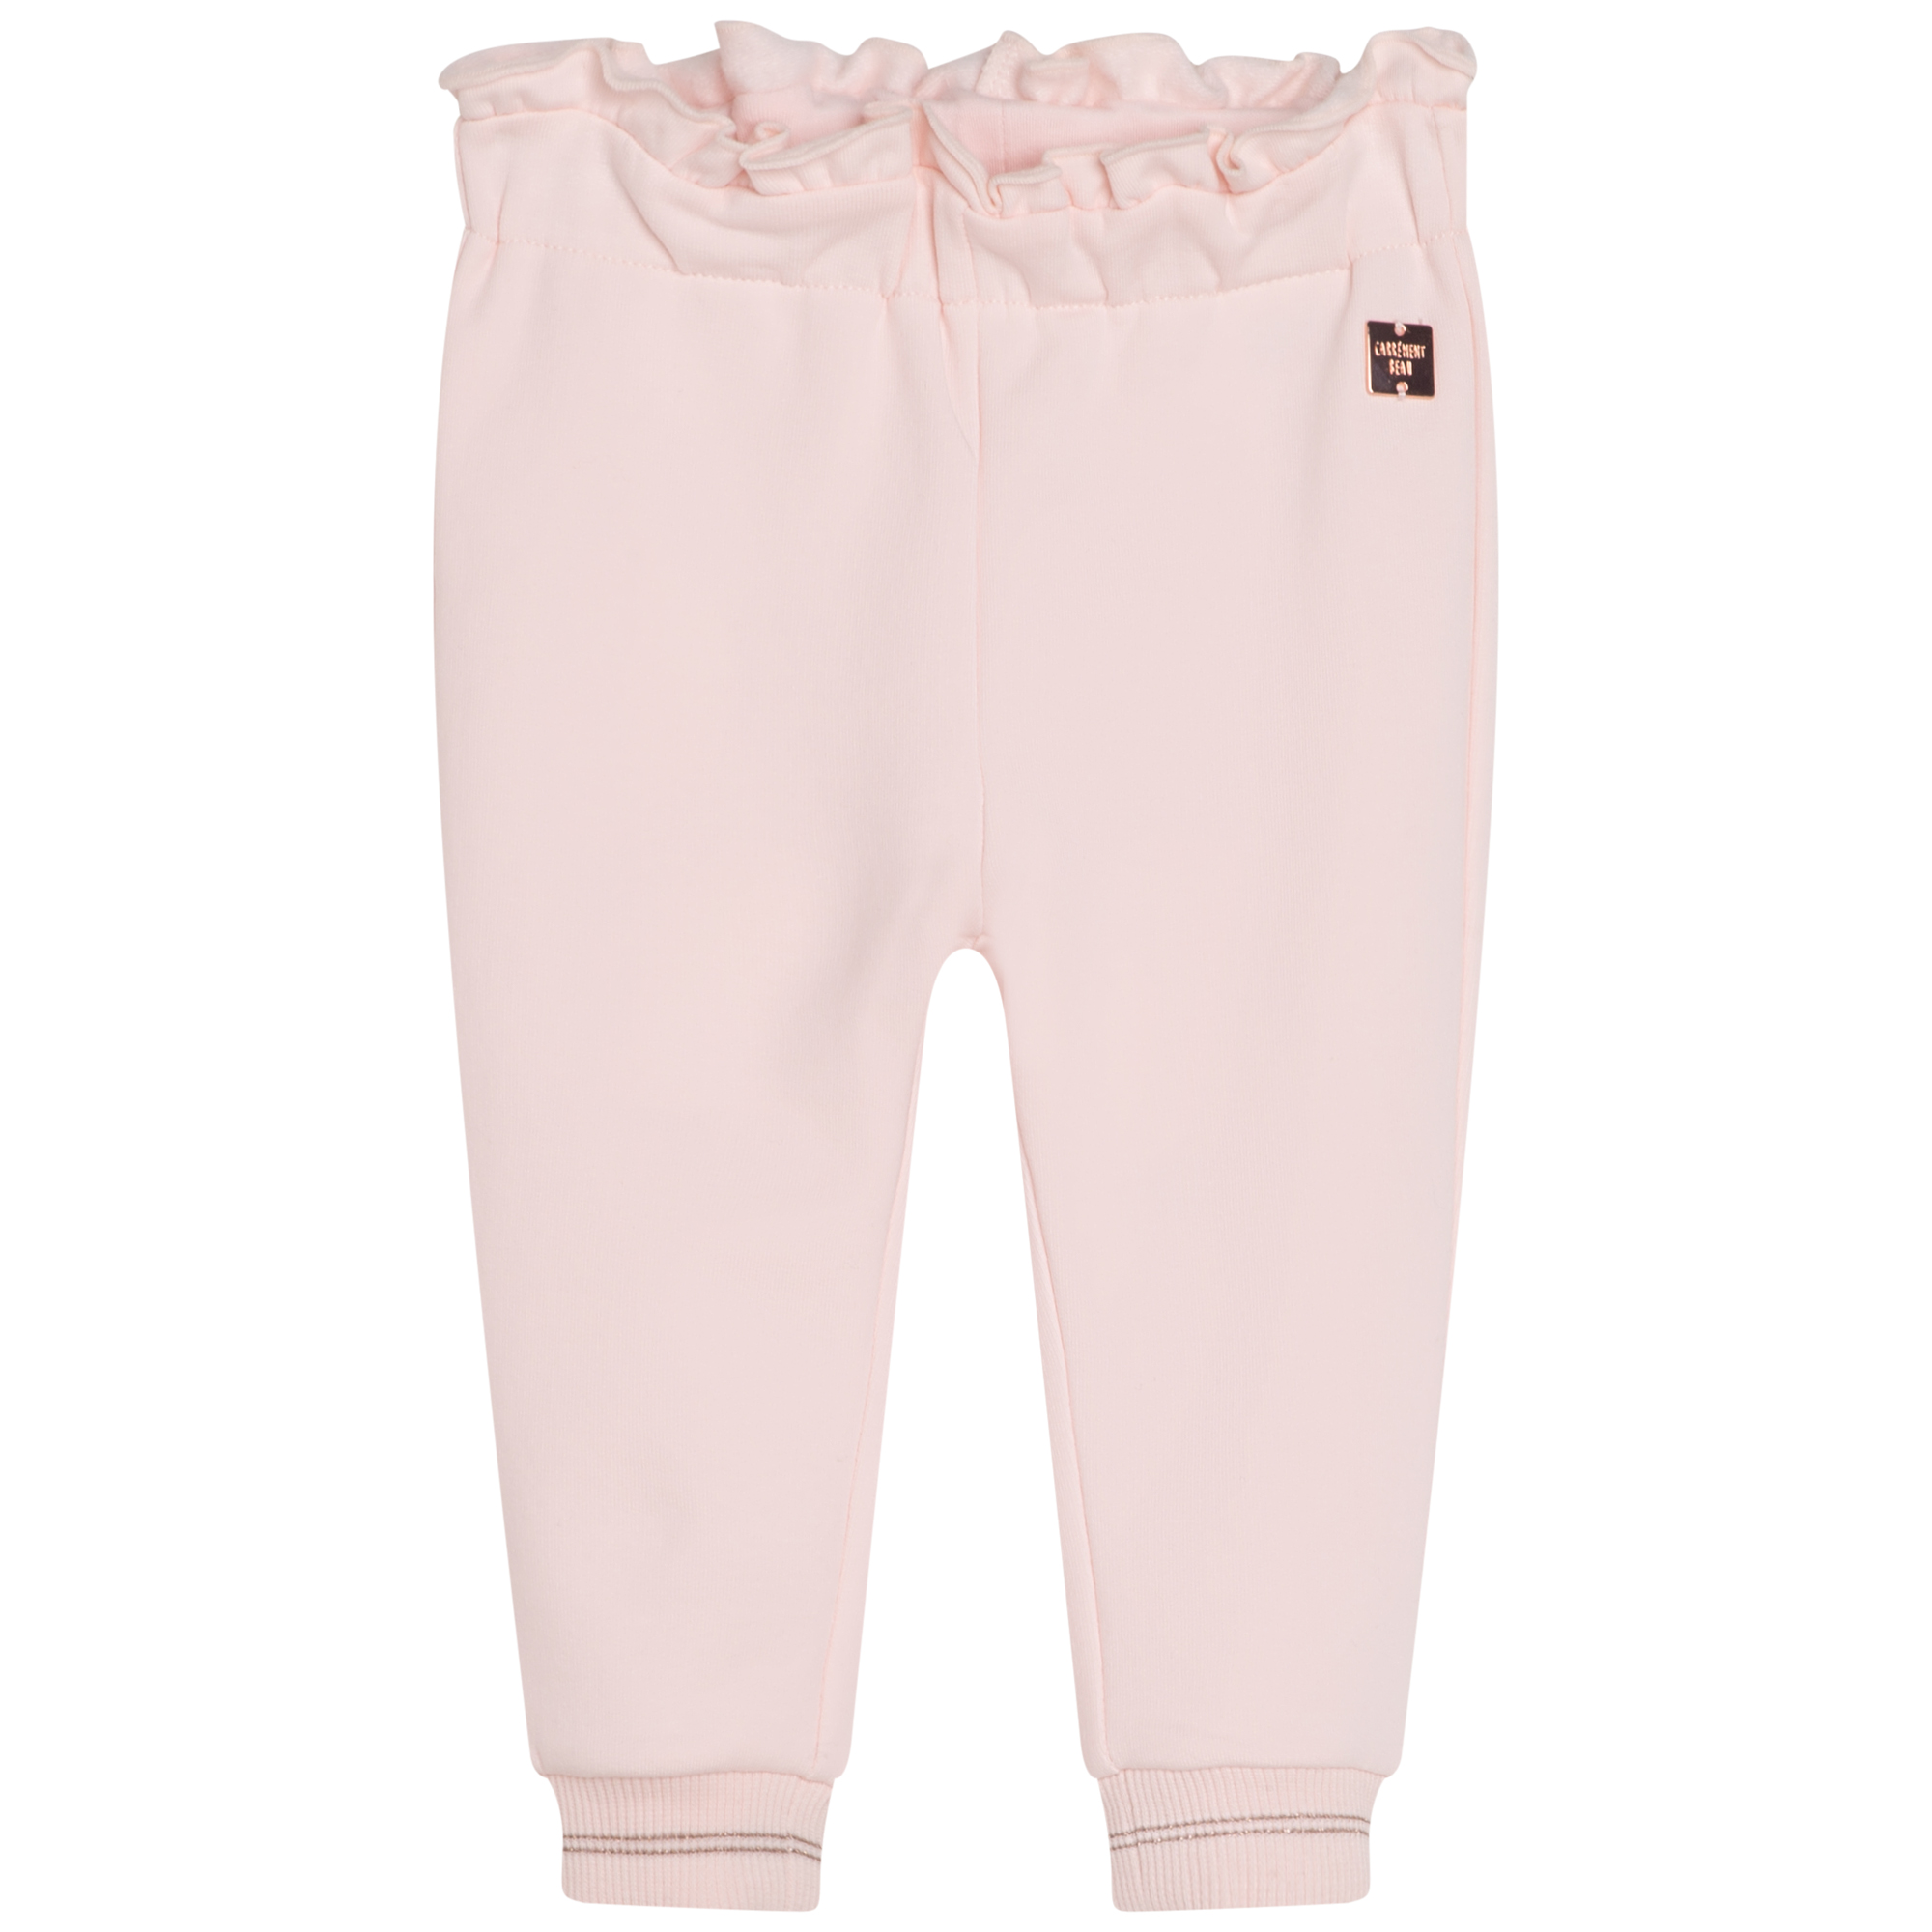 Frilled fleece trousers CARREMENT BEAU for GIRL